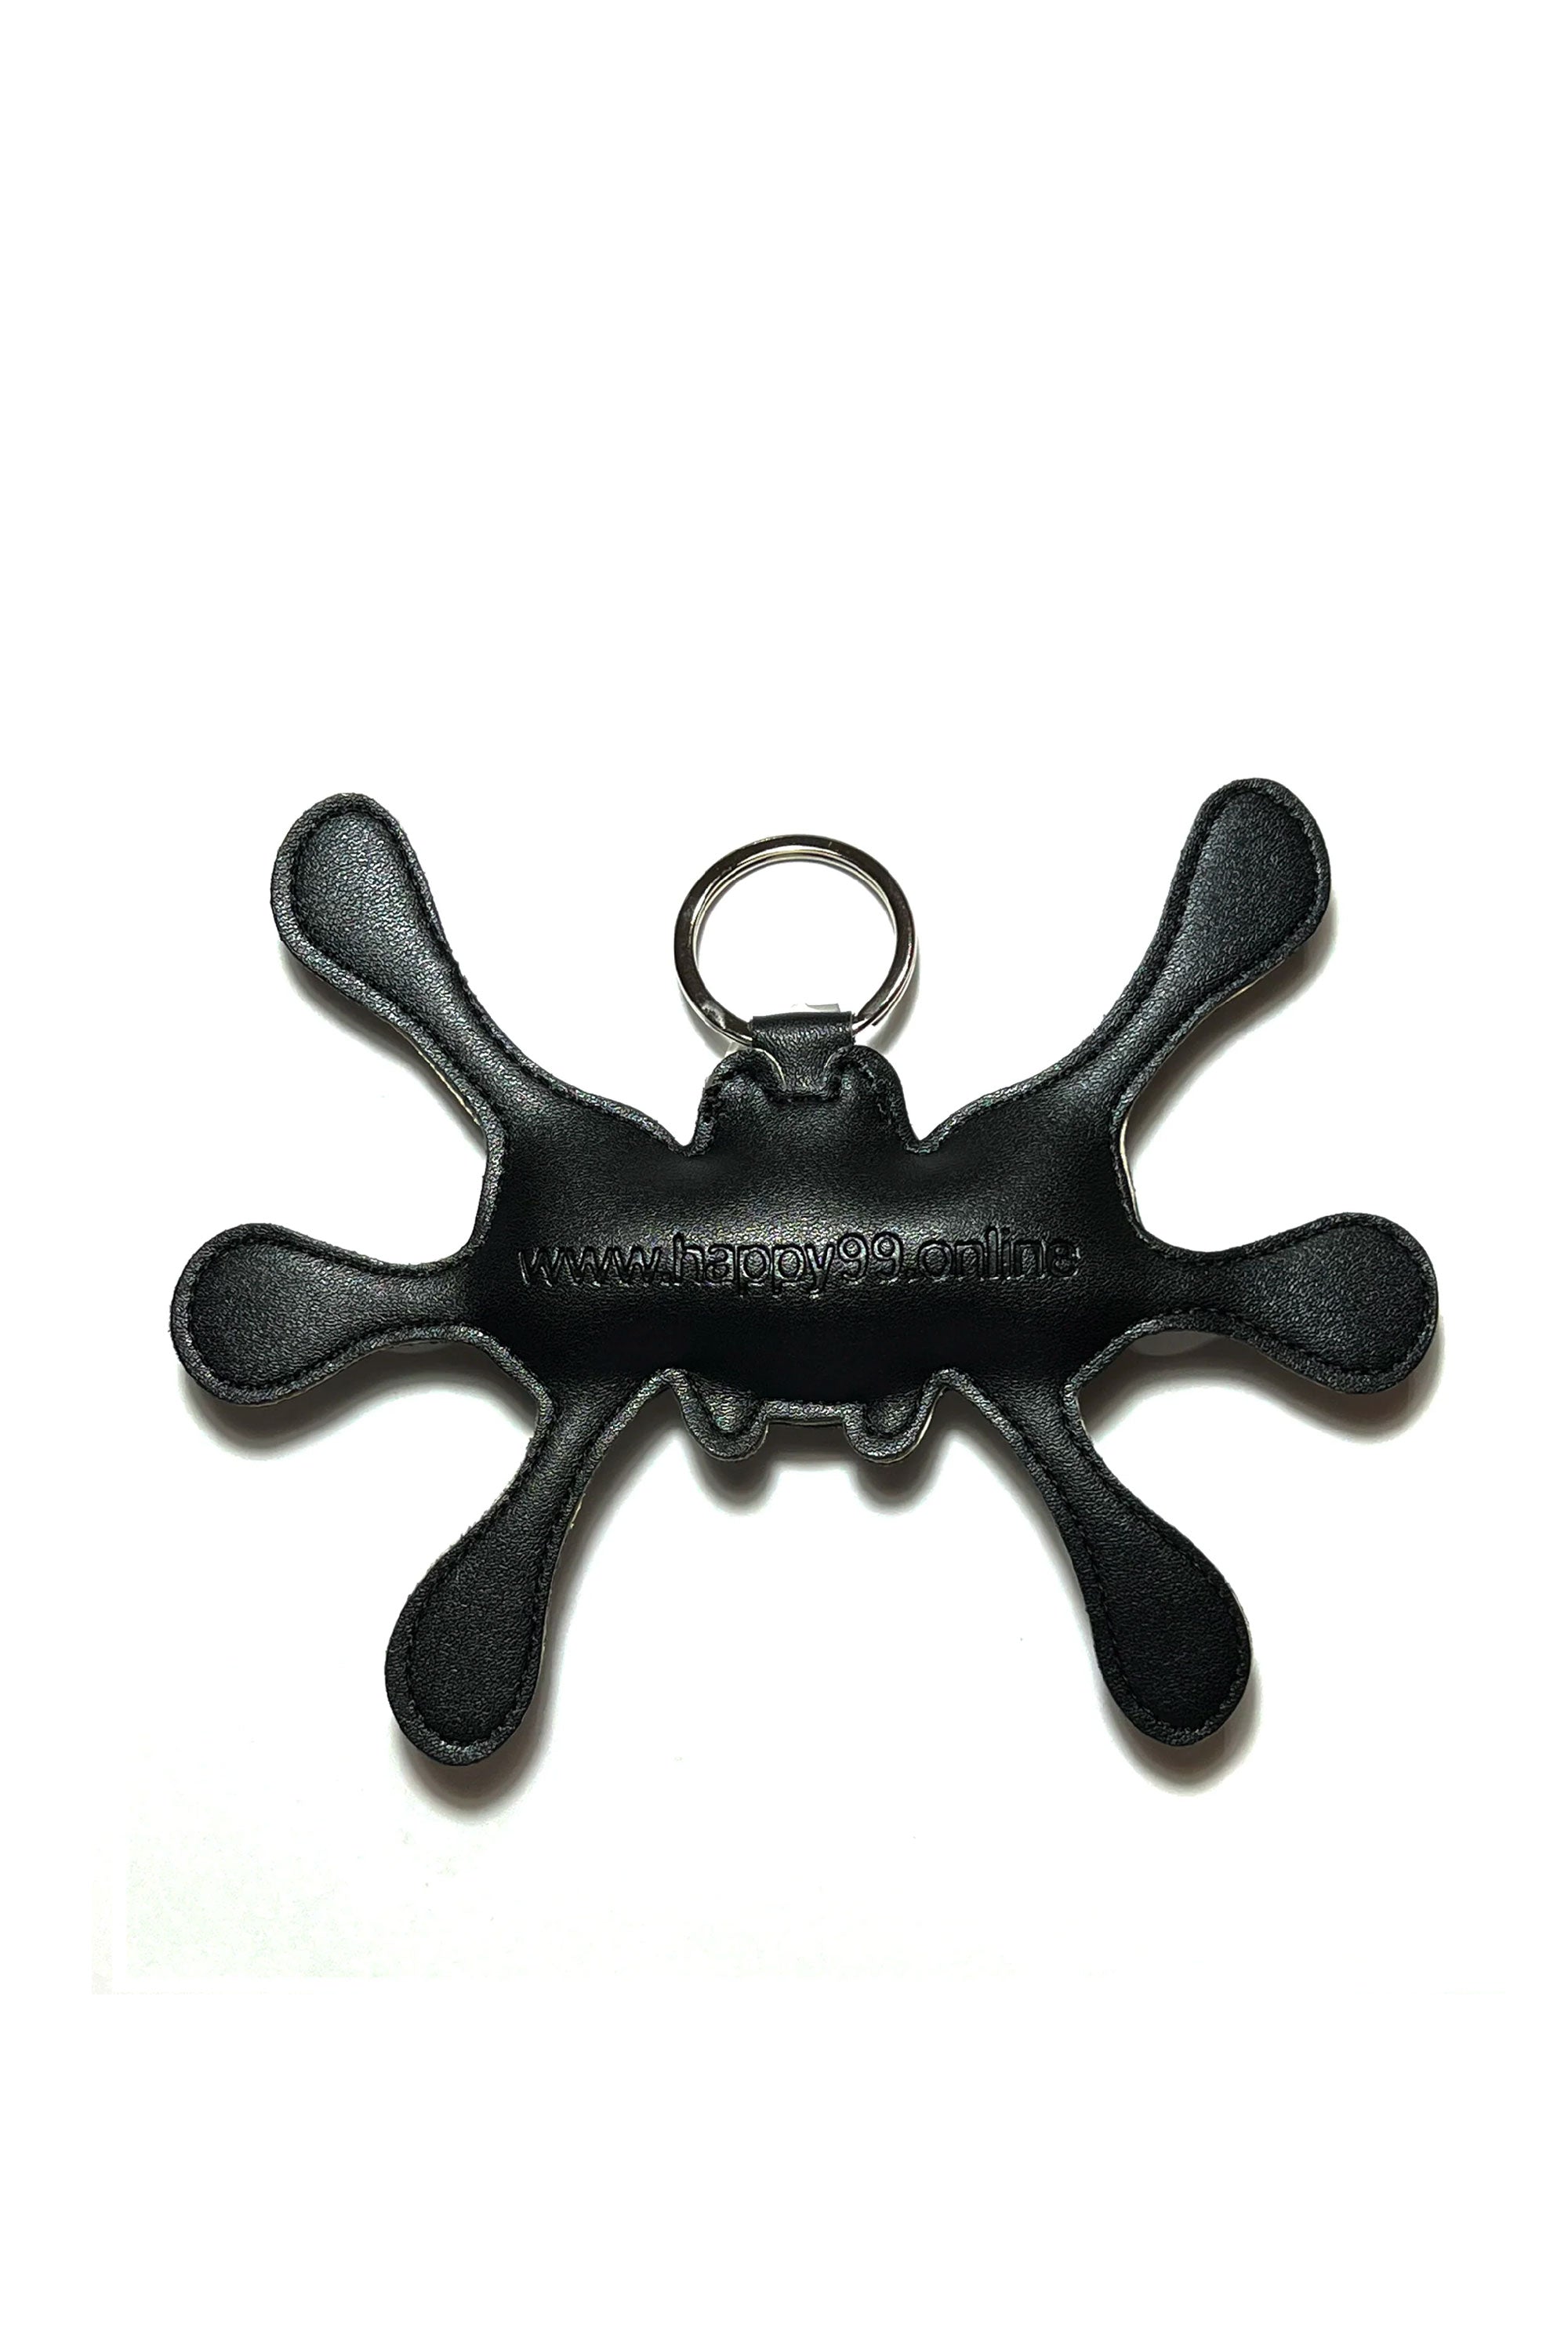 The HAPPY 99 - ANGEL99 LEATHER KEYCHAIN  available online with global shipping, and in PAM Stores Melbourne and Sydney.